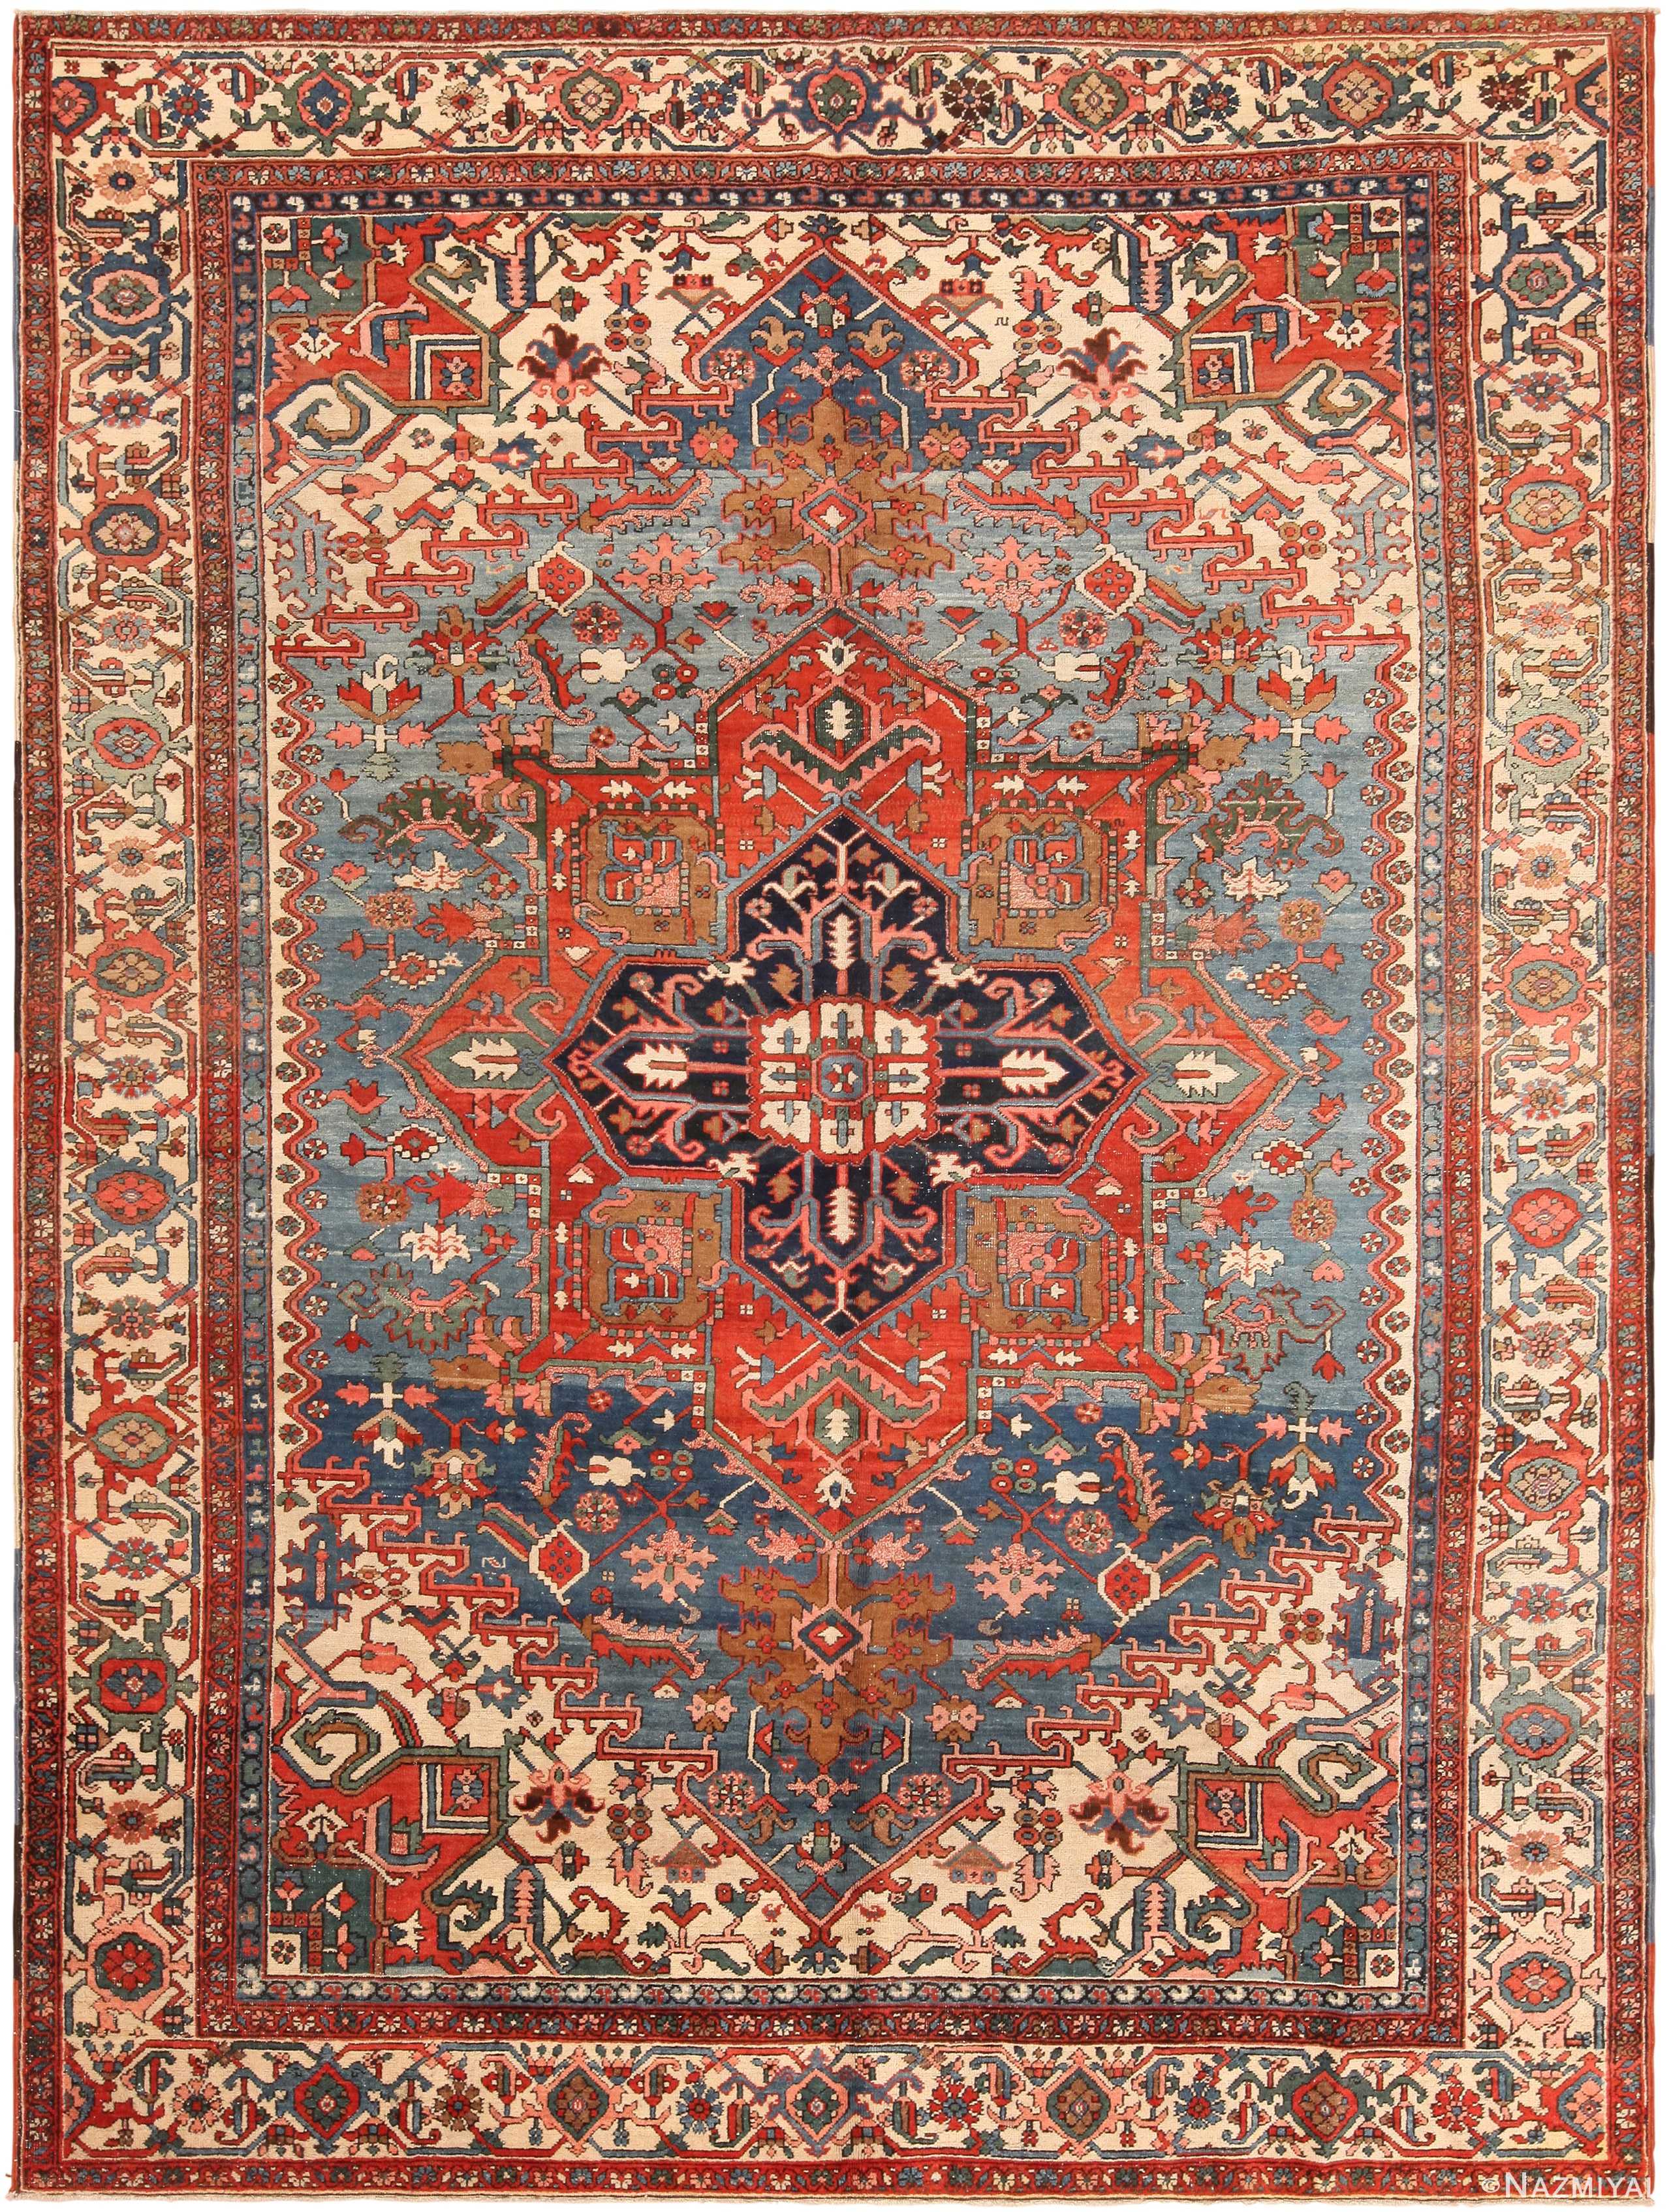 Antique Persian Heriz Area Rug 71472 by Nazmiyal Antique Rugs